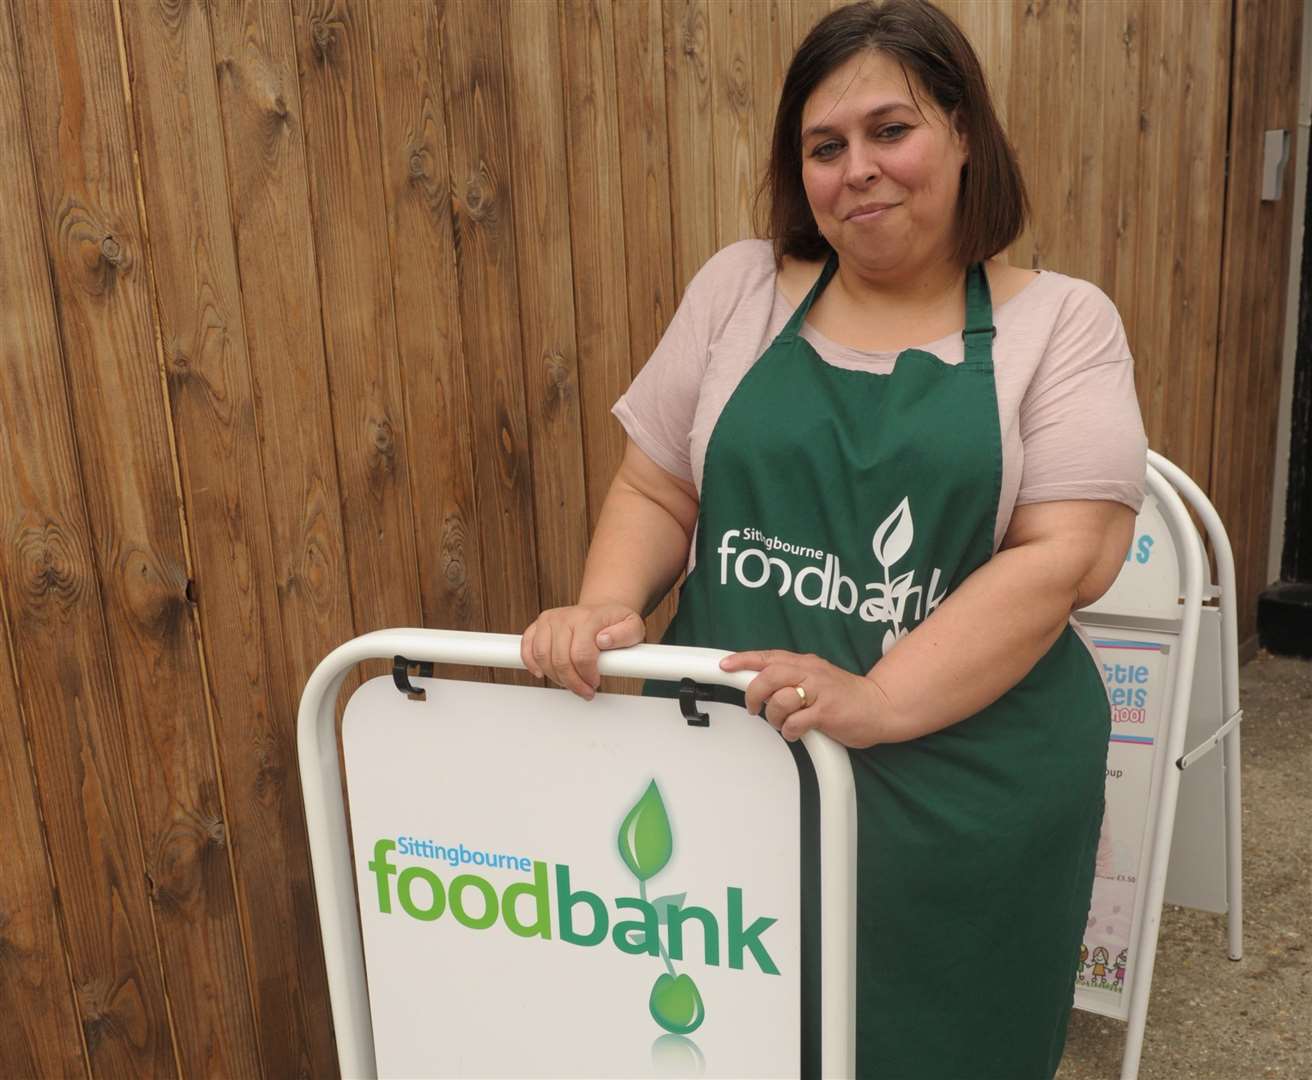 Esther Hurwood says referrals to the Sittingbourne food bank are up by 75%